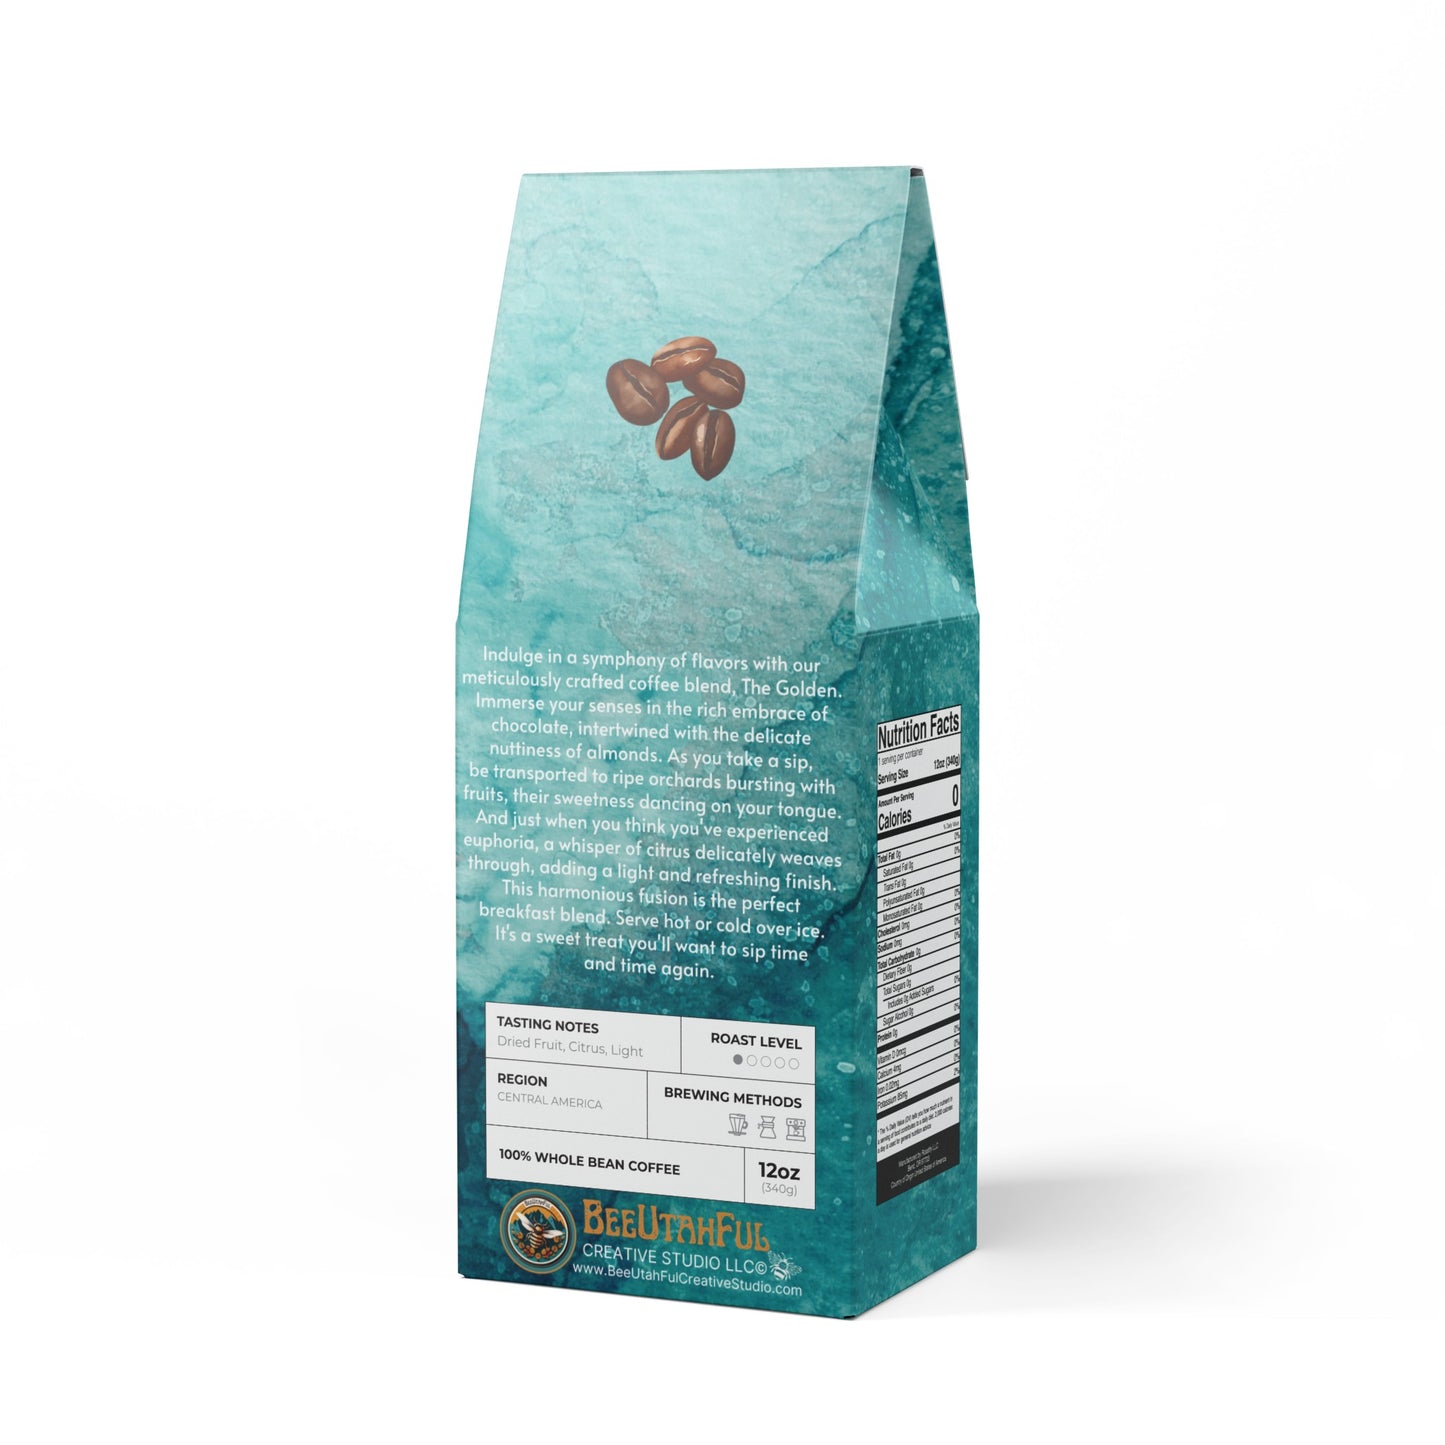 Moona-Bean Coffee, The Golden (Light Roast) - JULY Limited-Edition